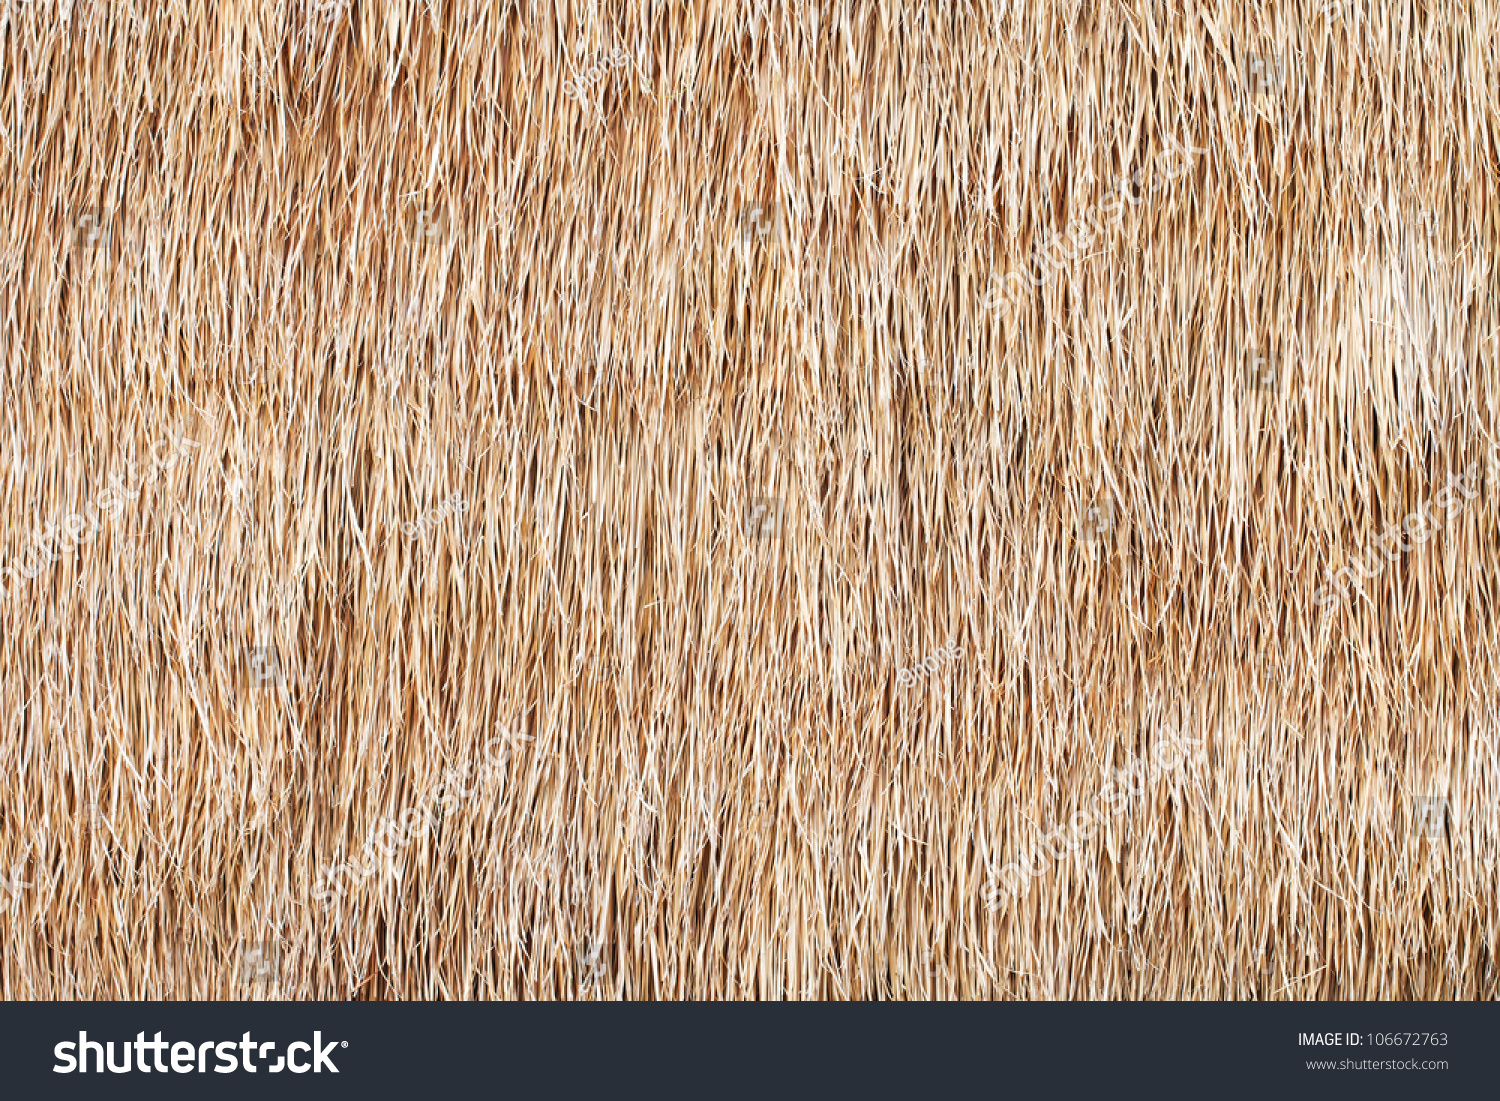 Texture Hay Bale Background Dry Grass Stock Photo Edit Now